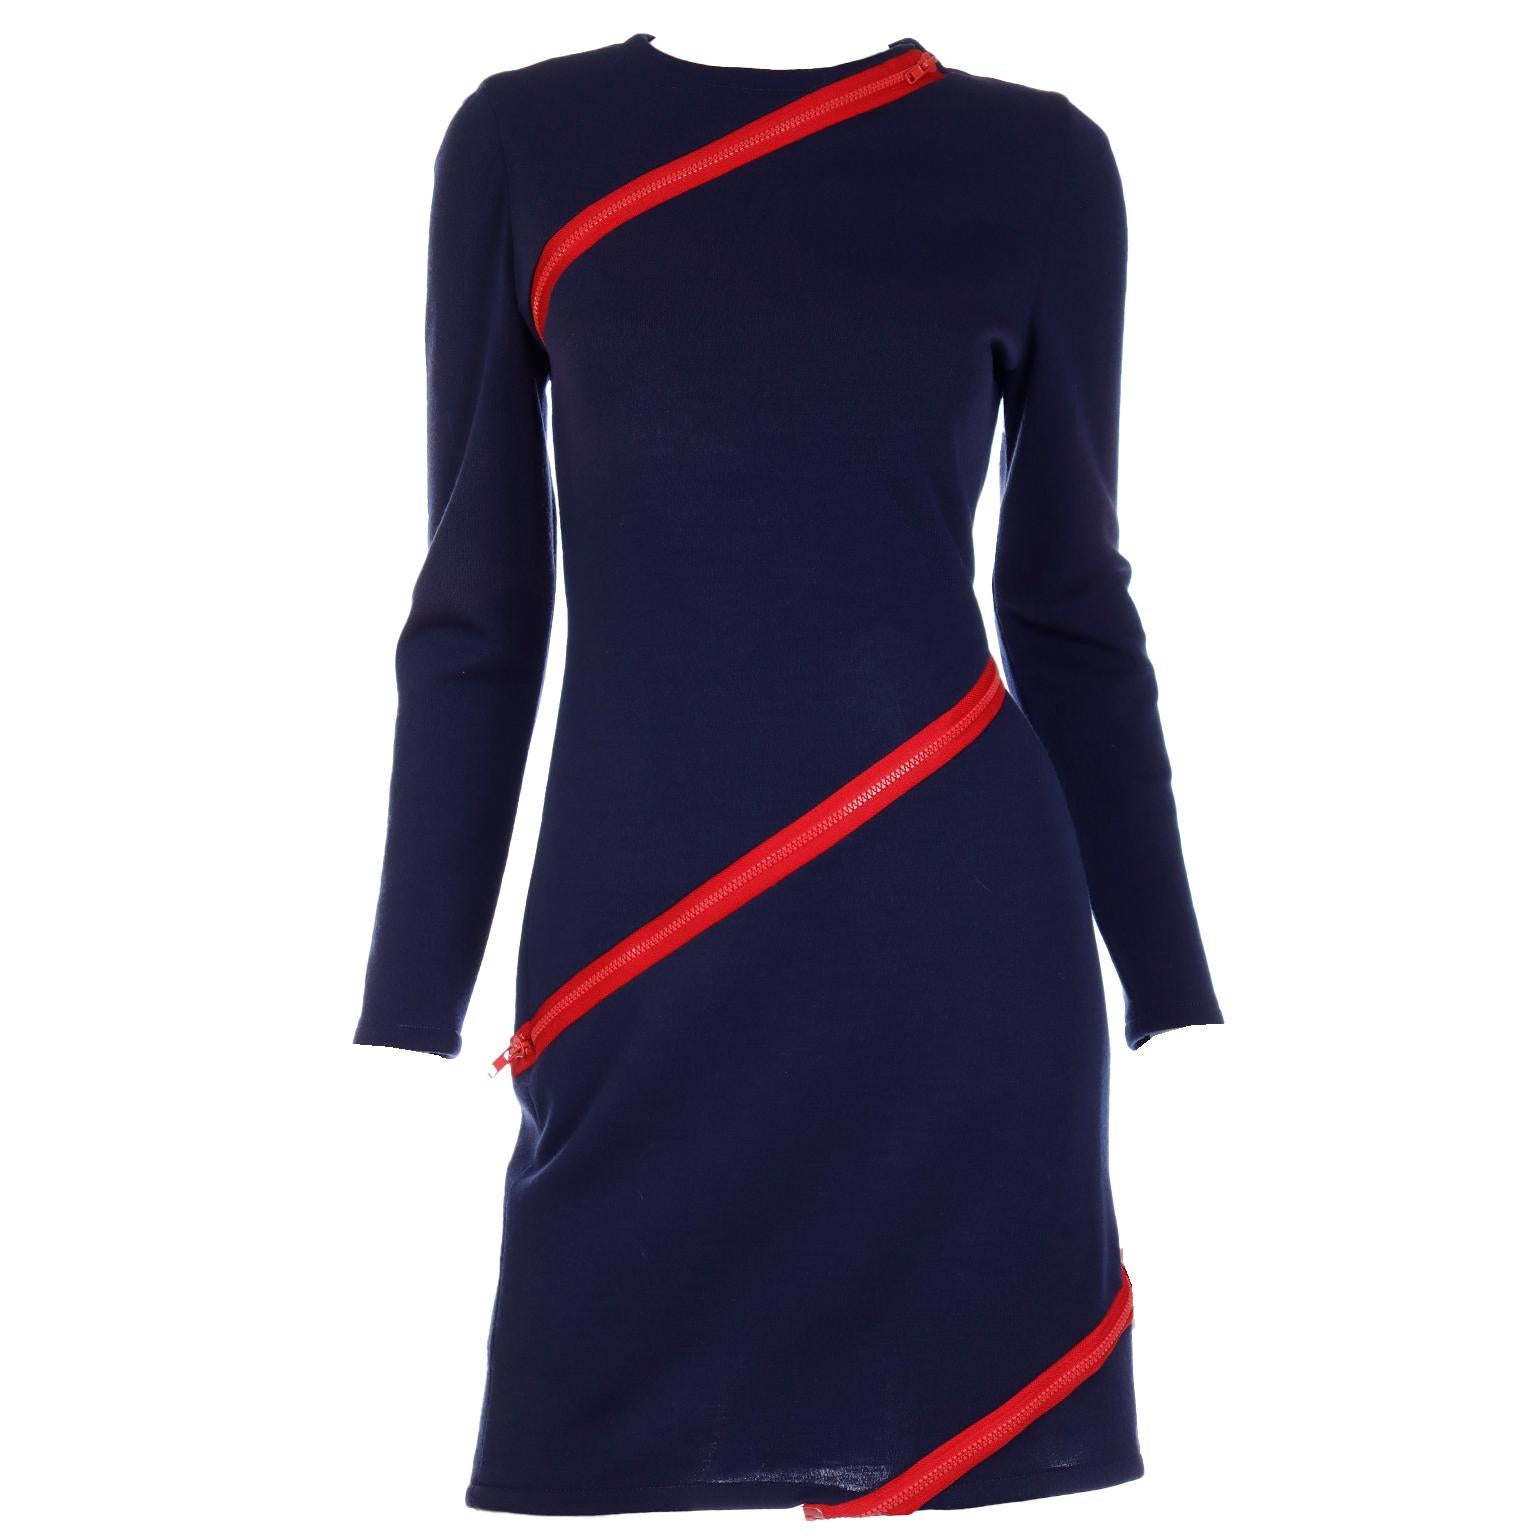 Vintage Bill Blass Navy Blue Knit Dress With Functional Red Zippers For Sale 8